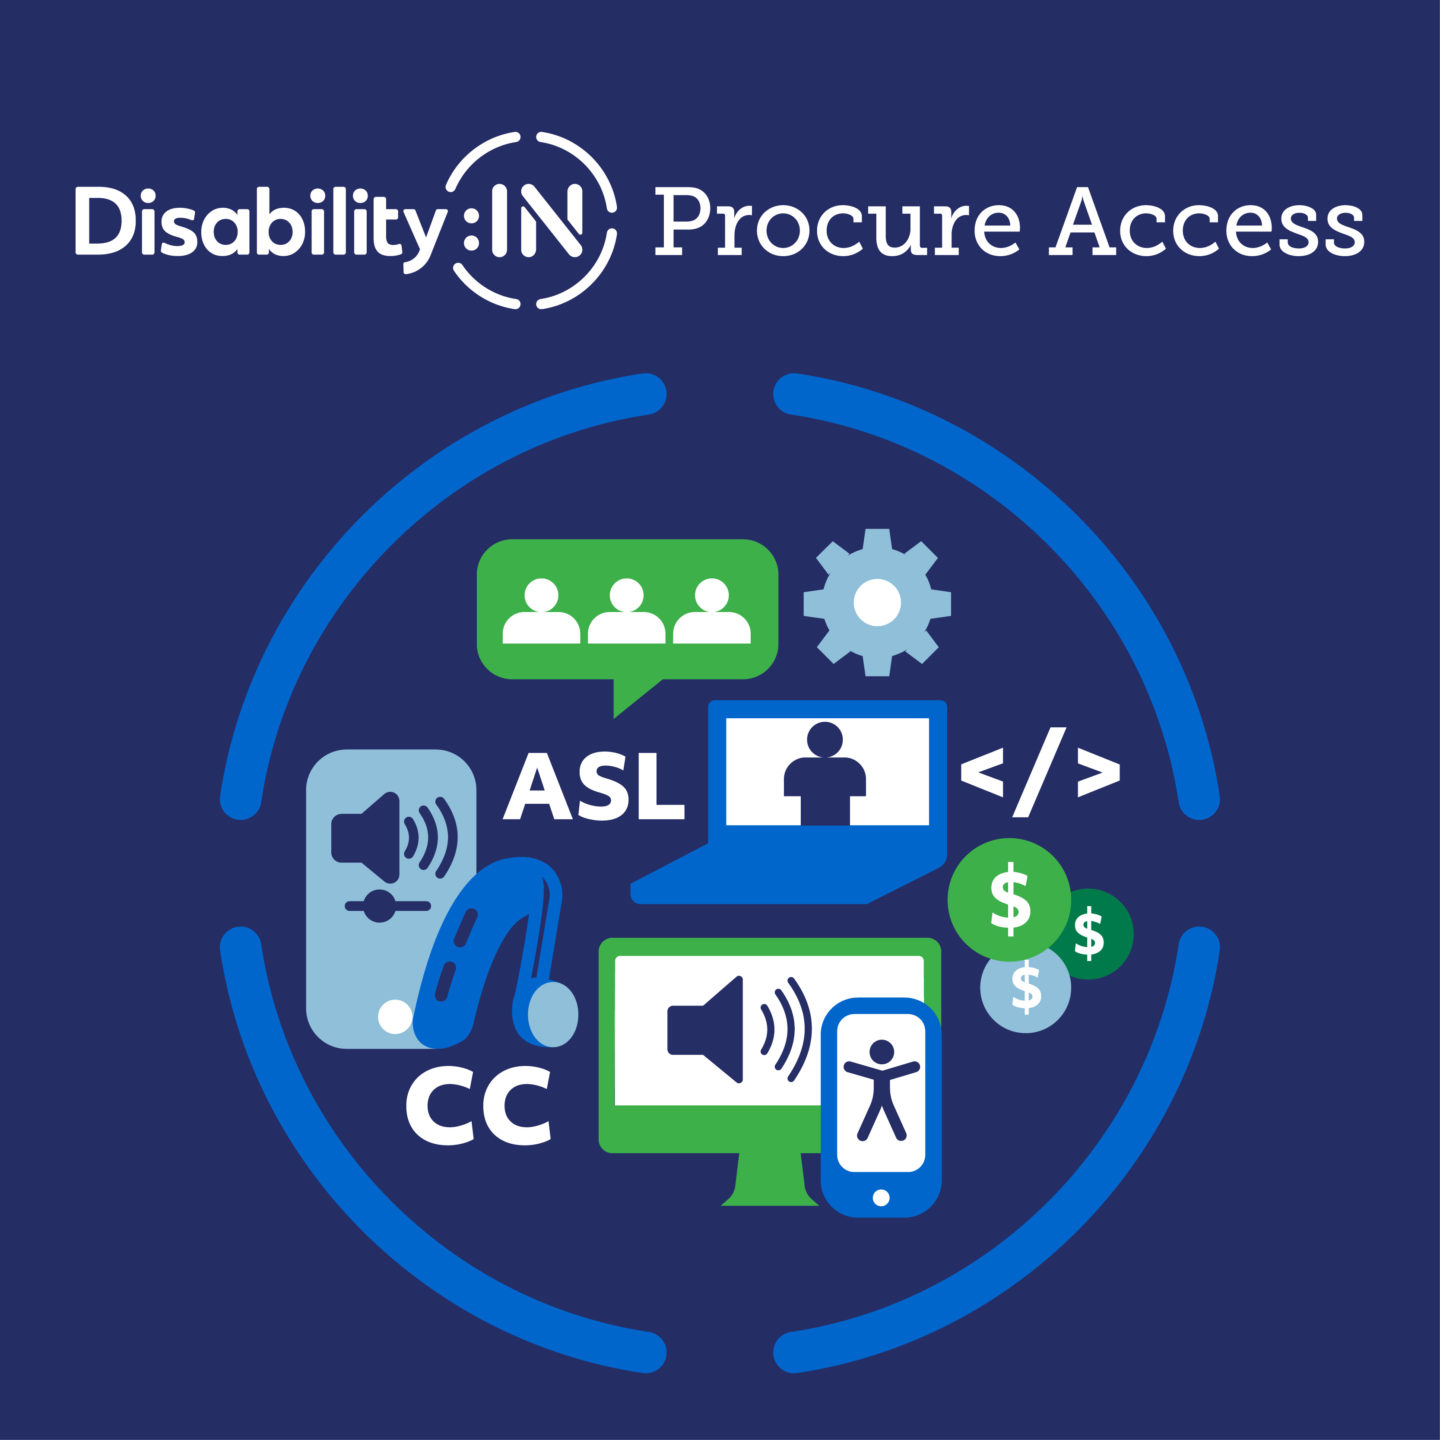 Disability:IN Procure Access. Blue and green illustrations featuring various digital accessibility tools and technologies.